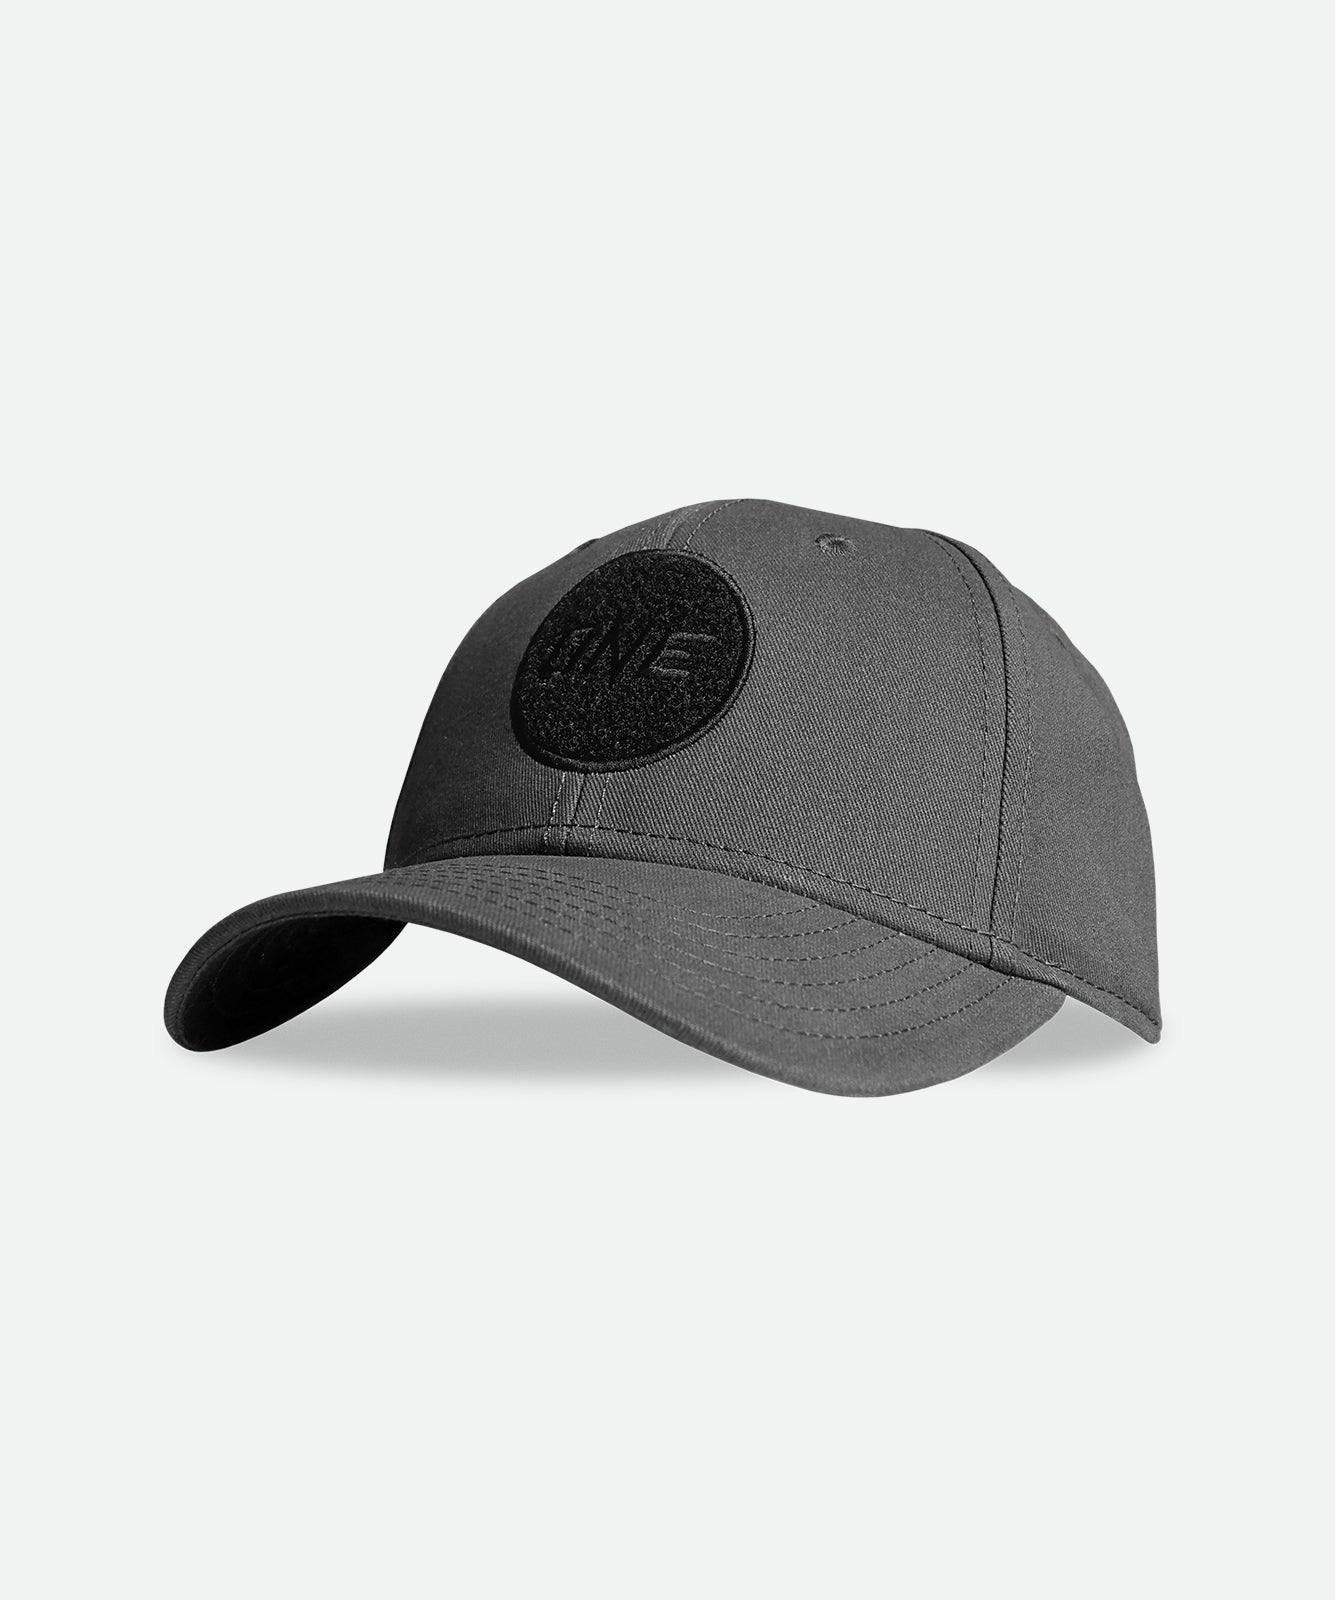 ONE Hero Cap (Gray) - ONE.SHOP Philippines | The Official Online Shop of ONE Championship